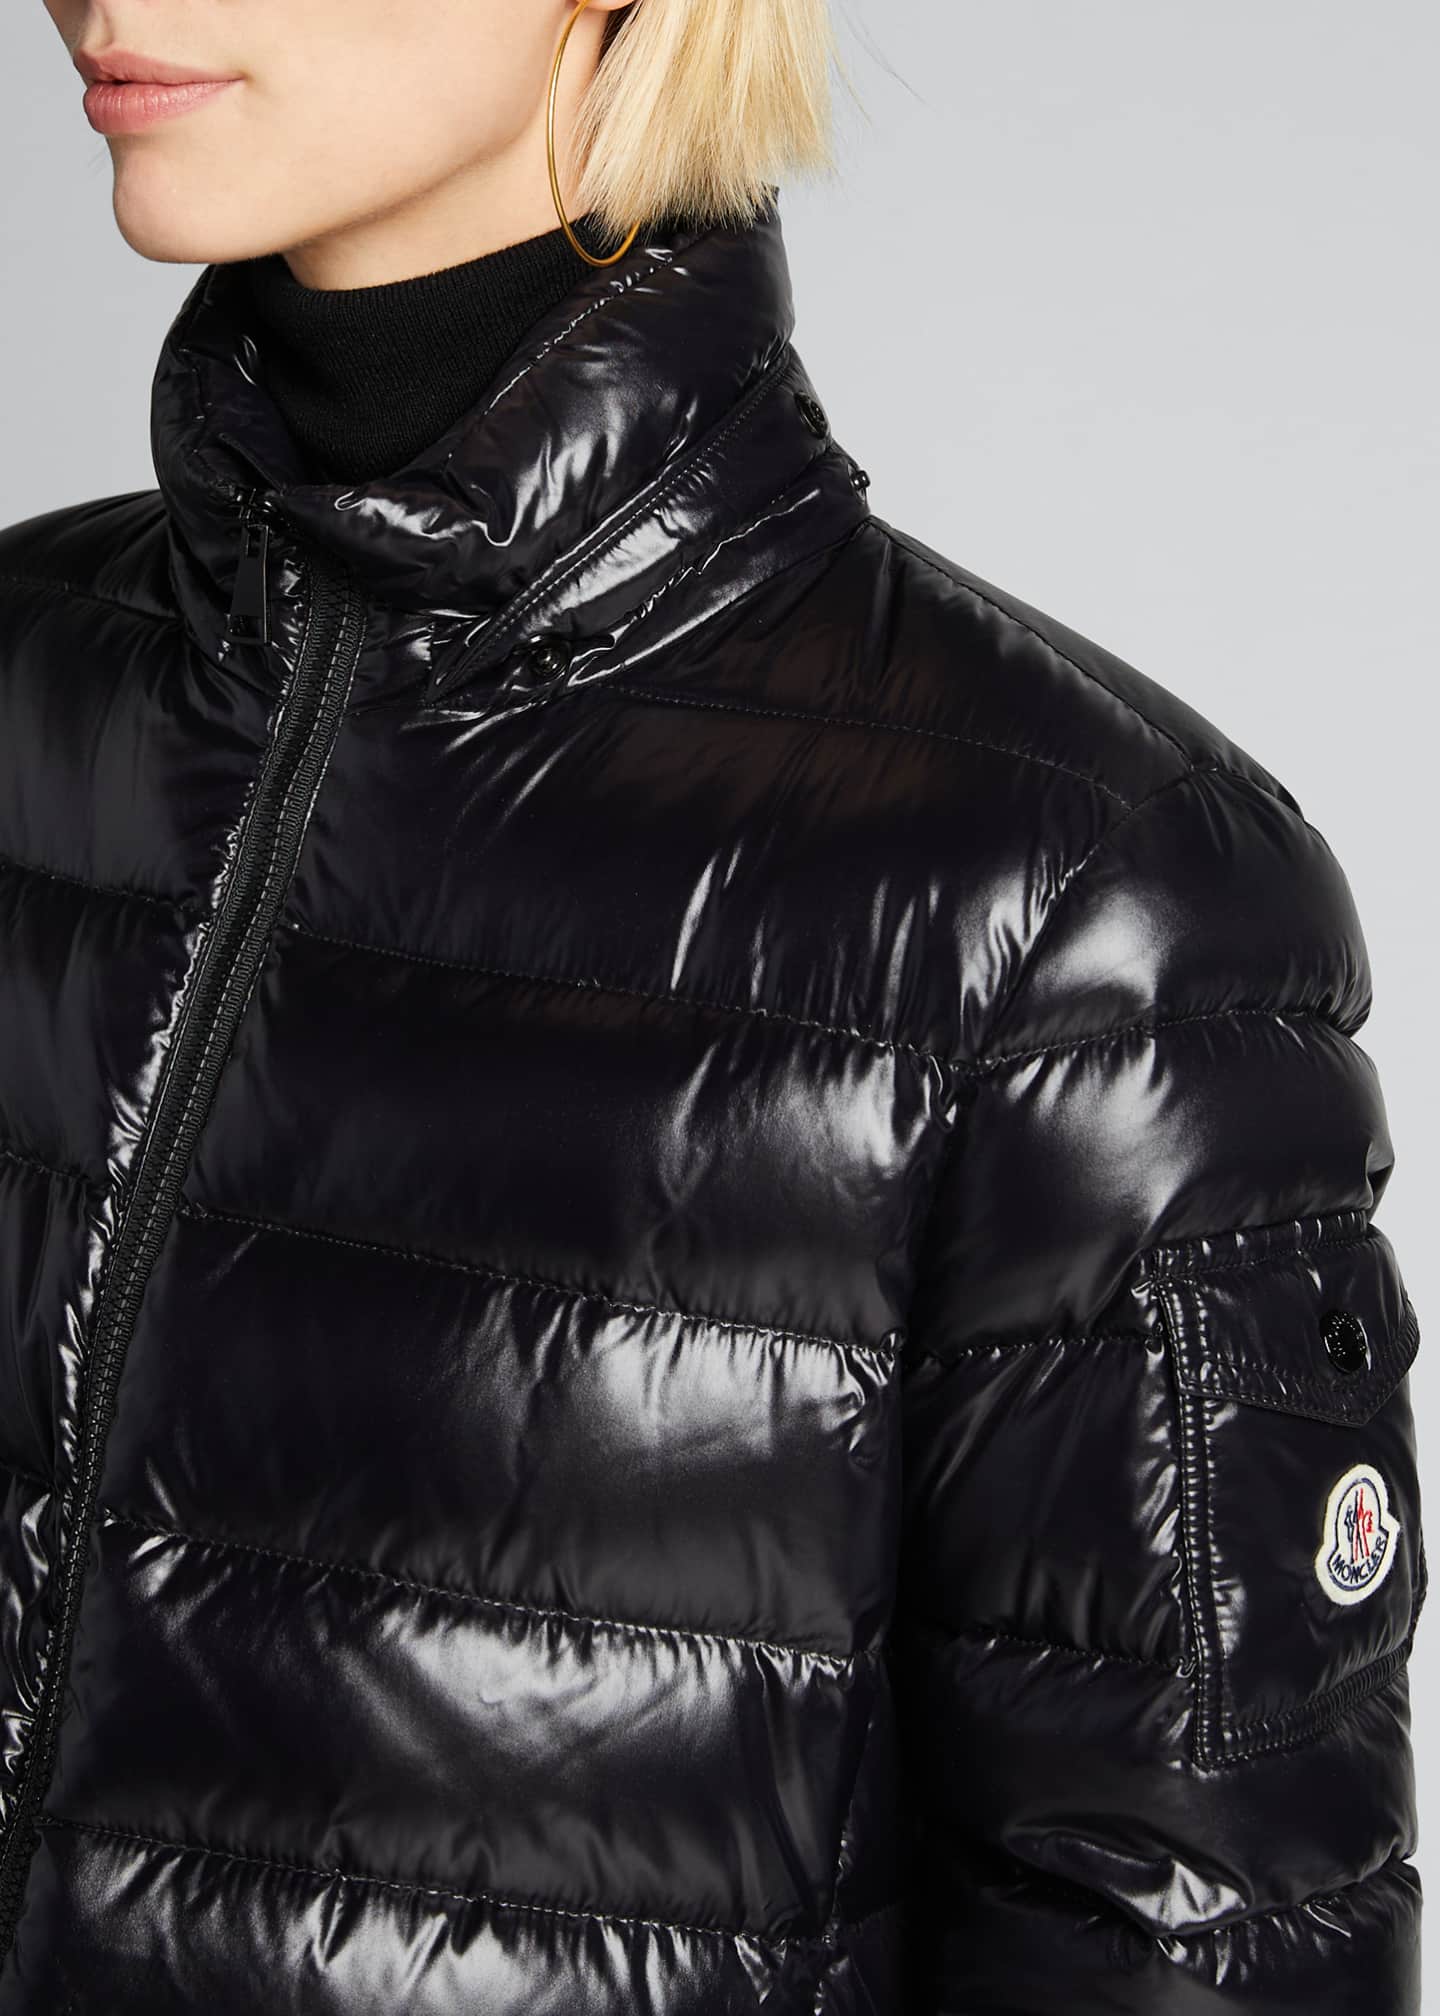 moncler fitted puffer jacket